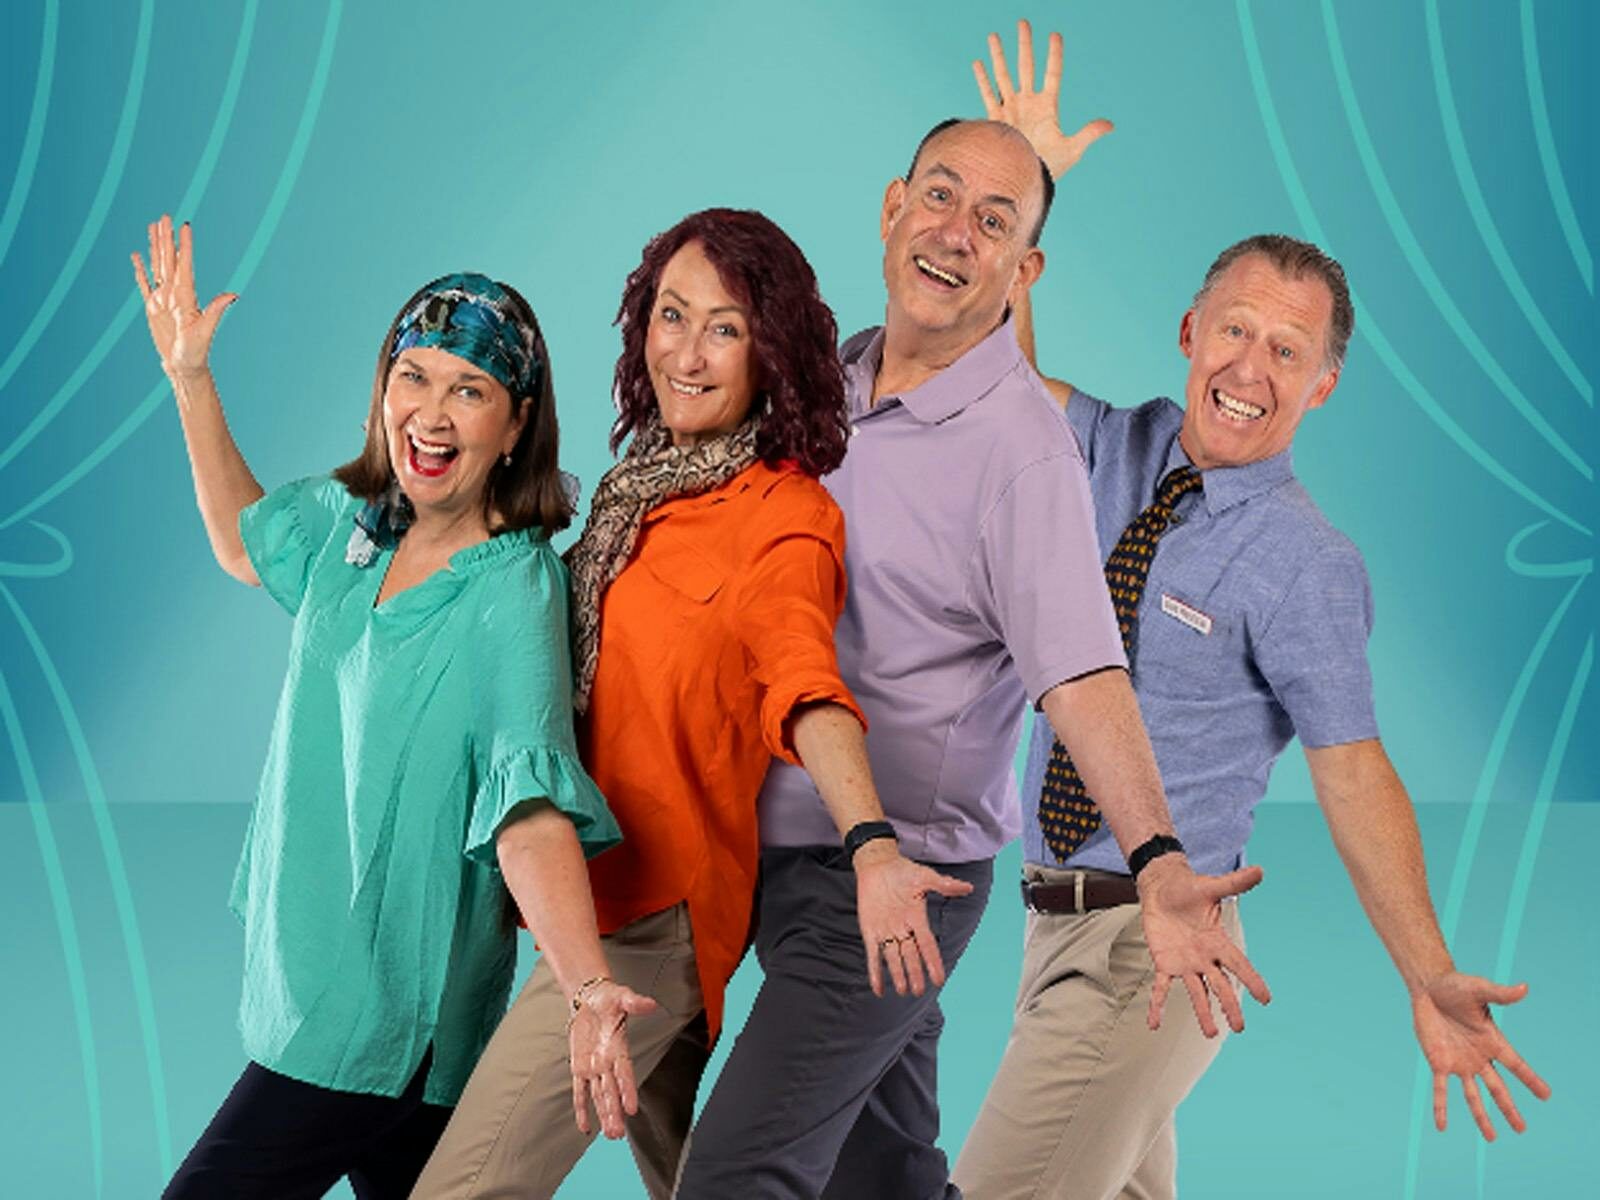 The Grandparents Club - A Comedy Musical by Wendy Harmer